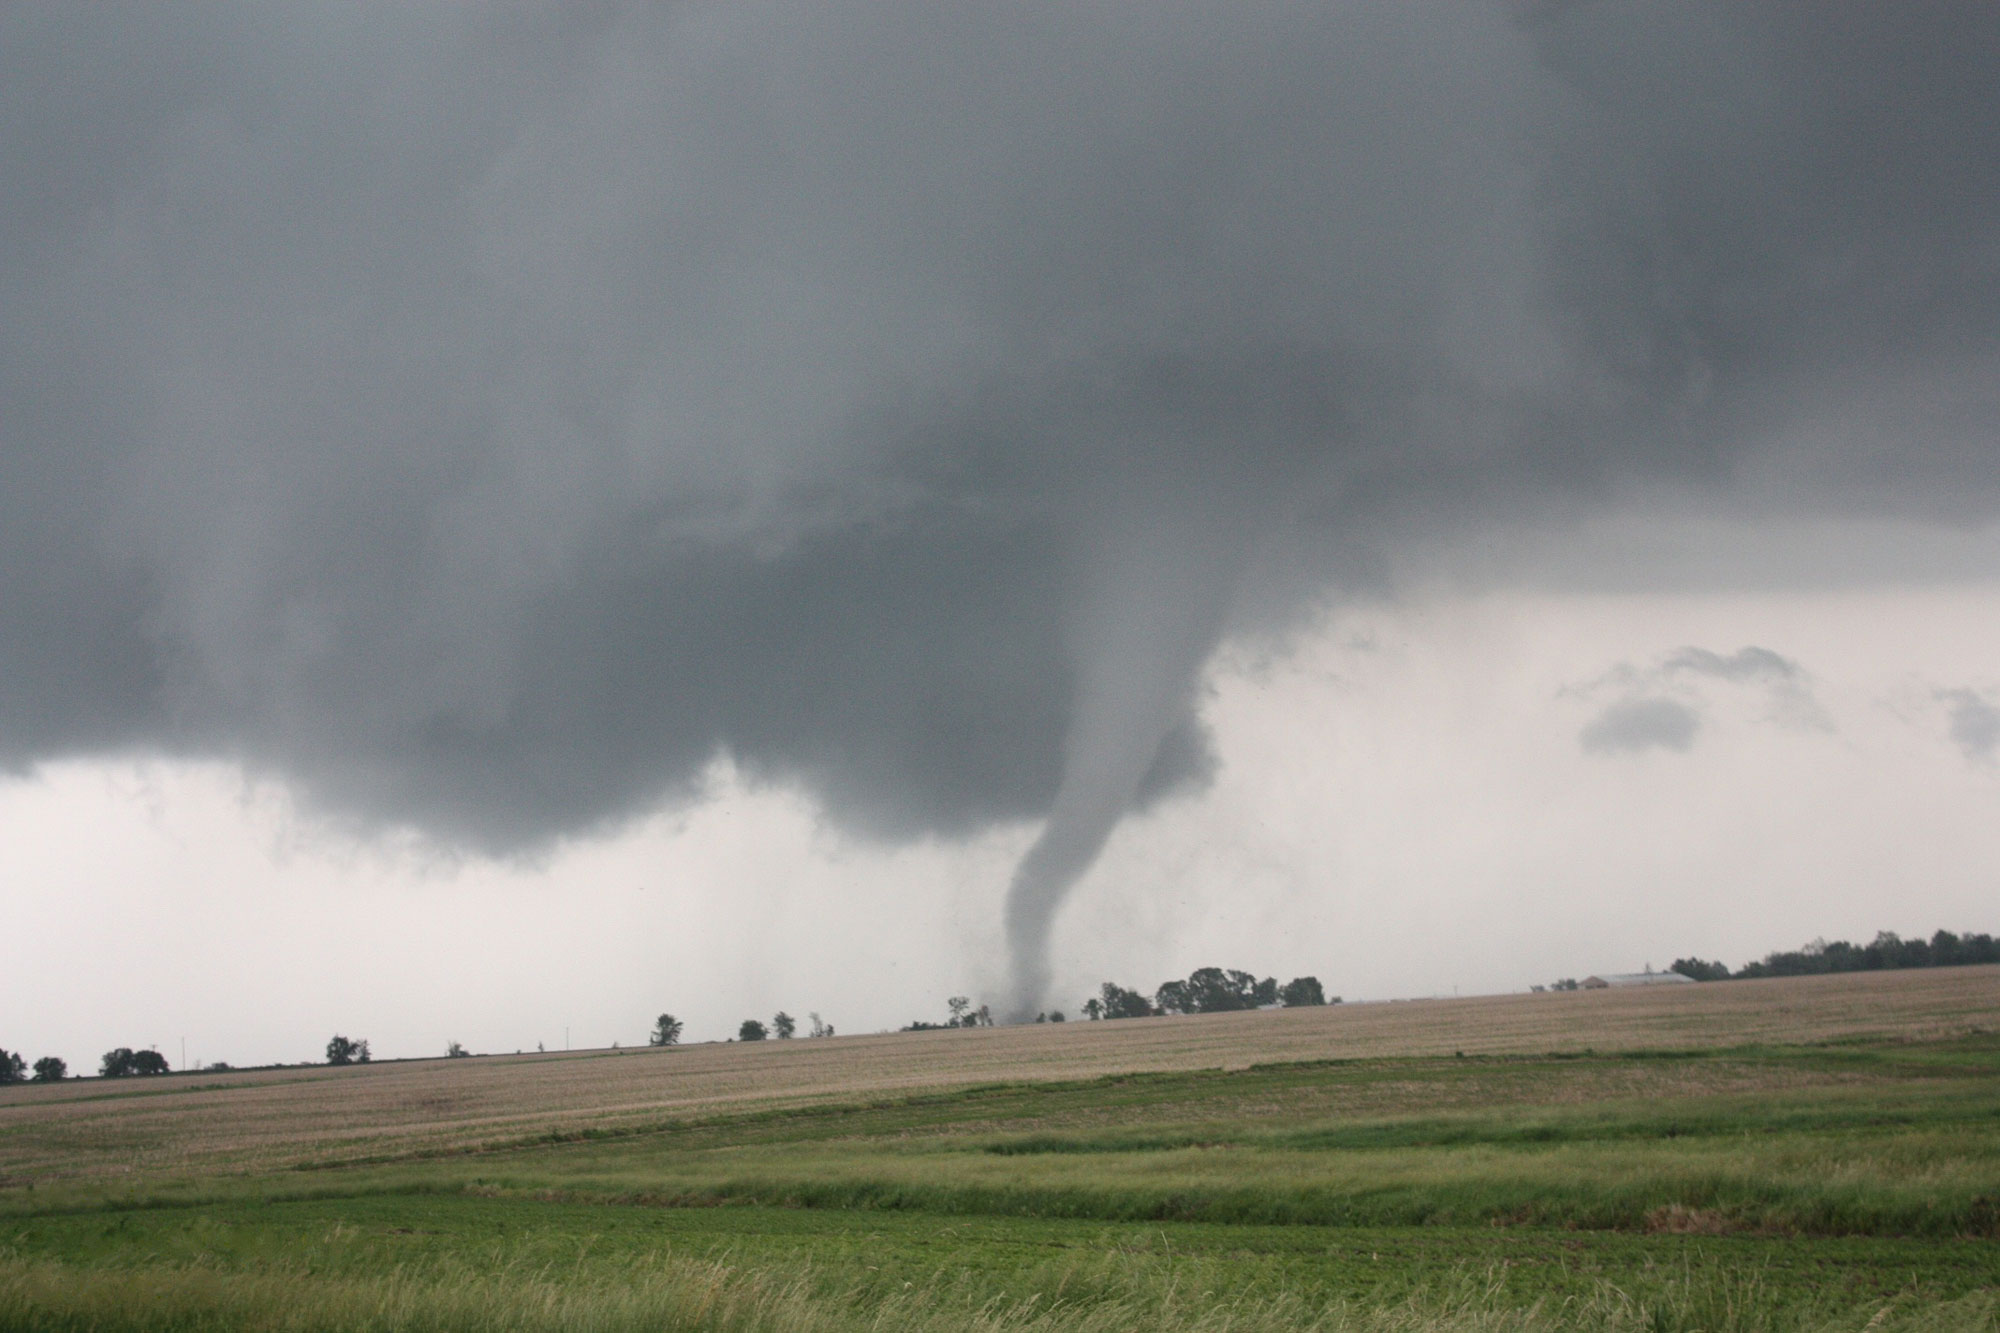 Photo of a tornado in Illinois. The photo shows fields of green and yellow grass in the foreground, with trees on the horizon. The sky is overcast with gray clouds. A thin tornado extends down from the clouds at the center of the image, touching the ground on the horizon.